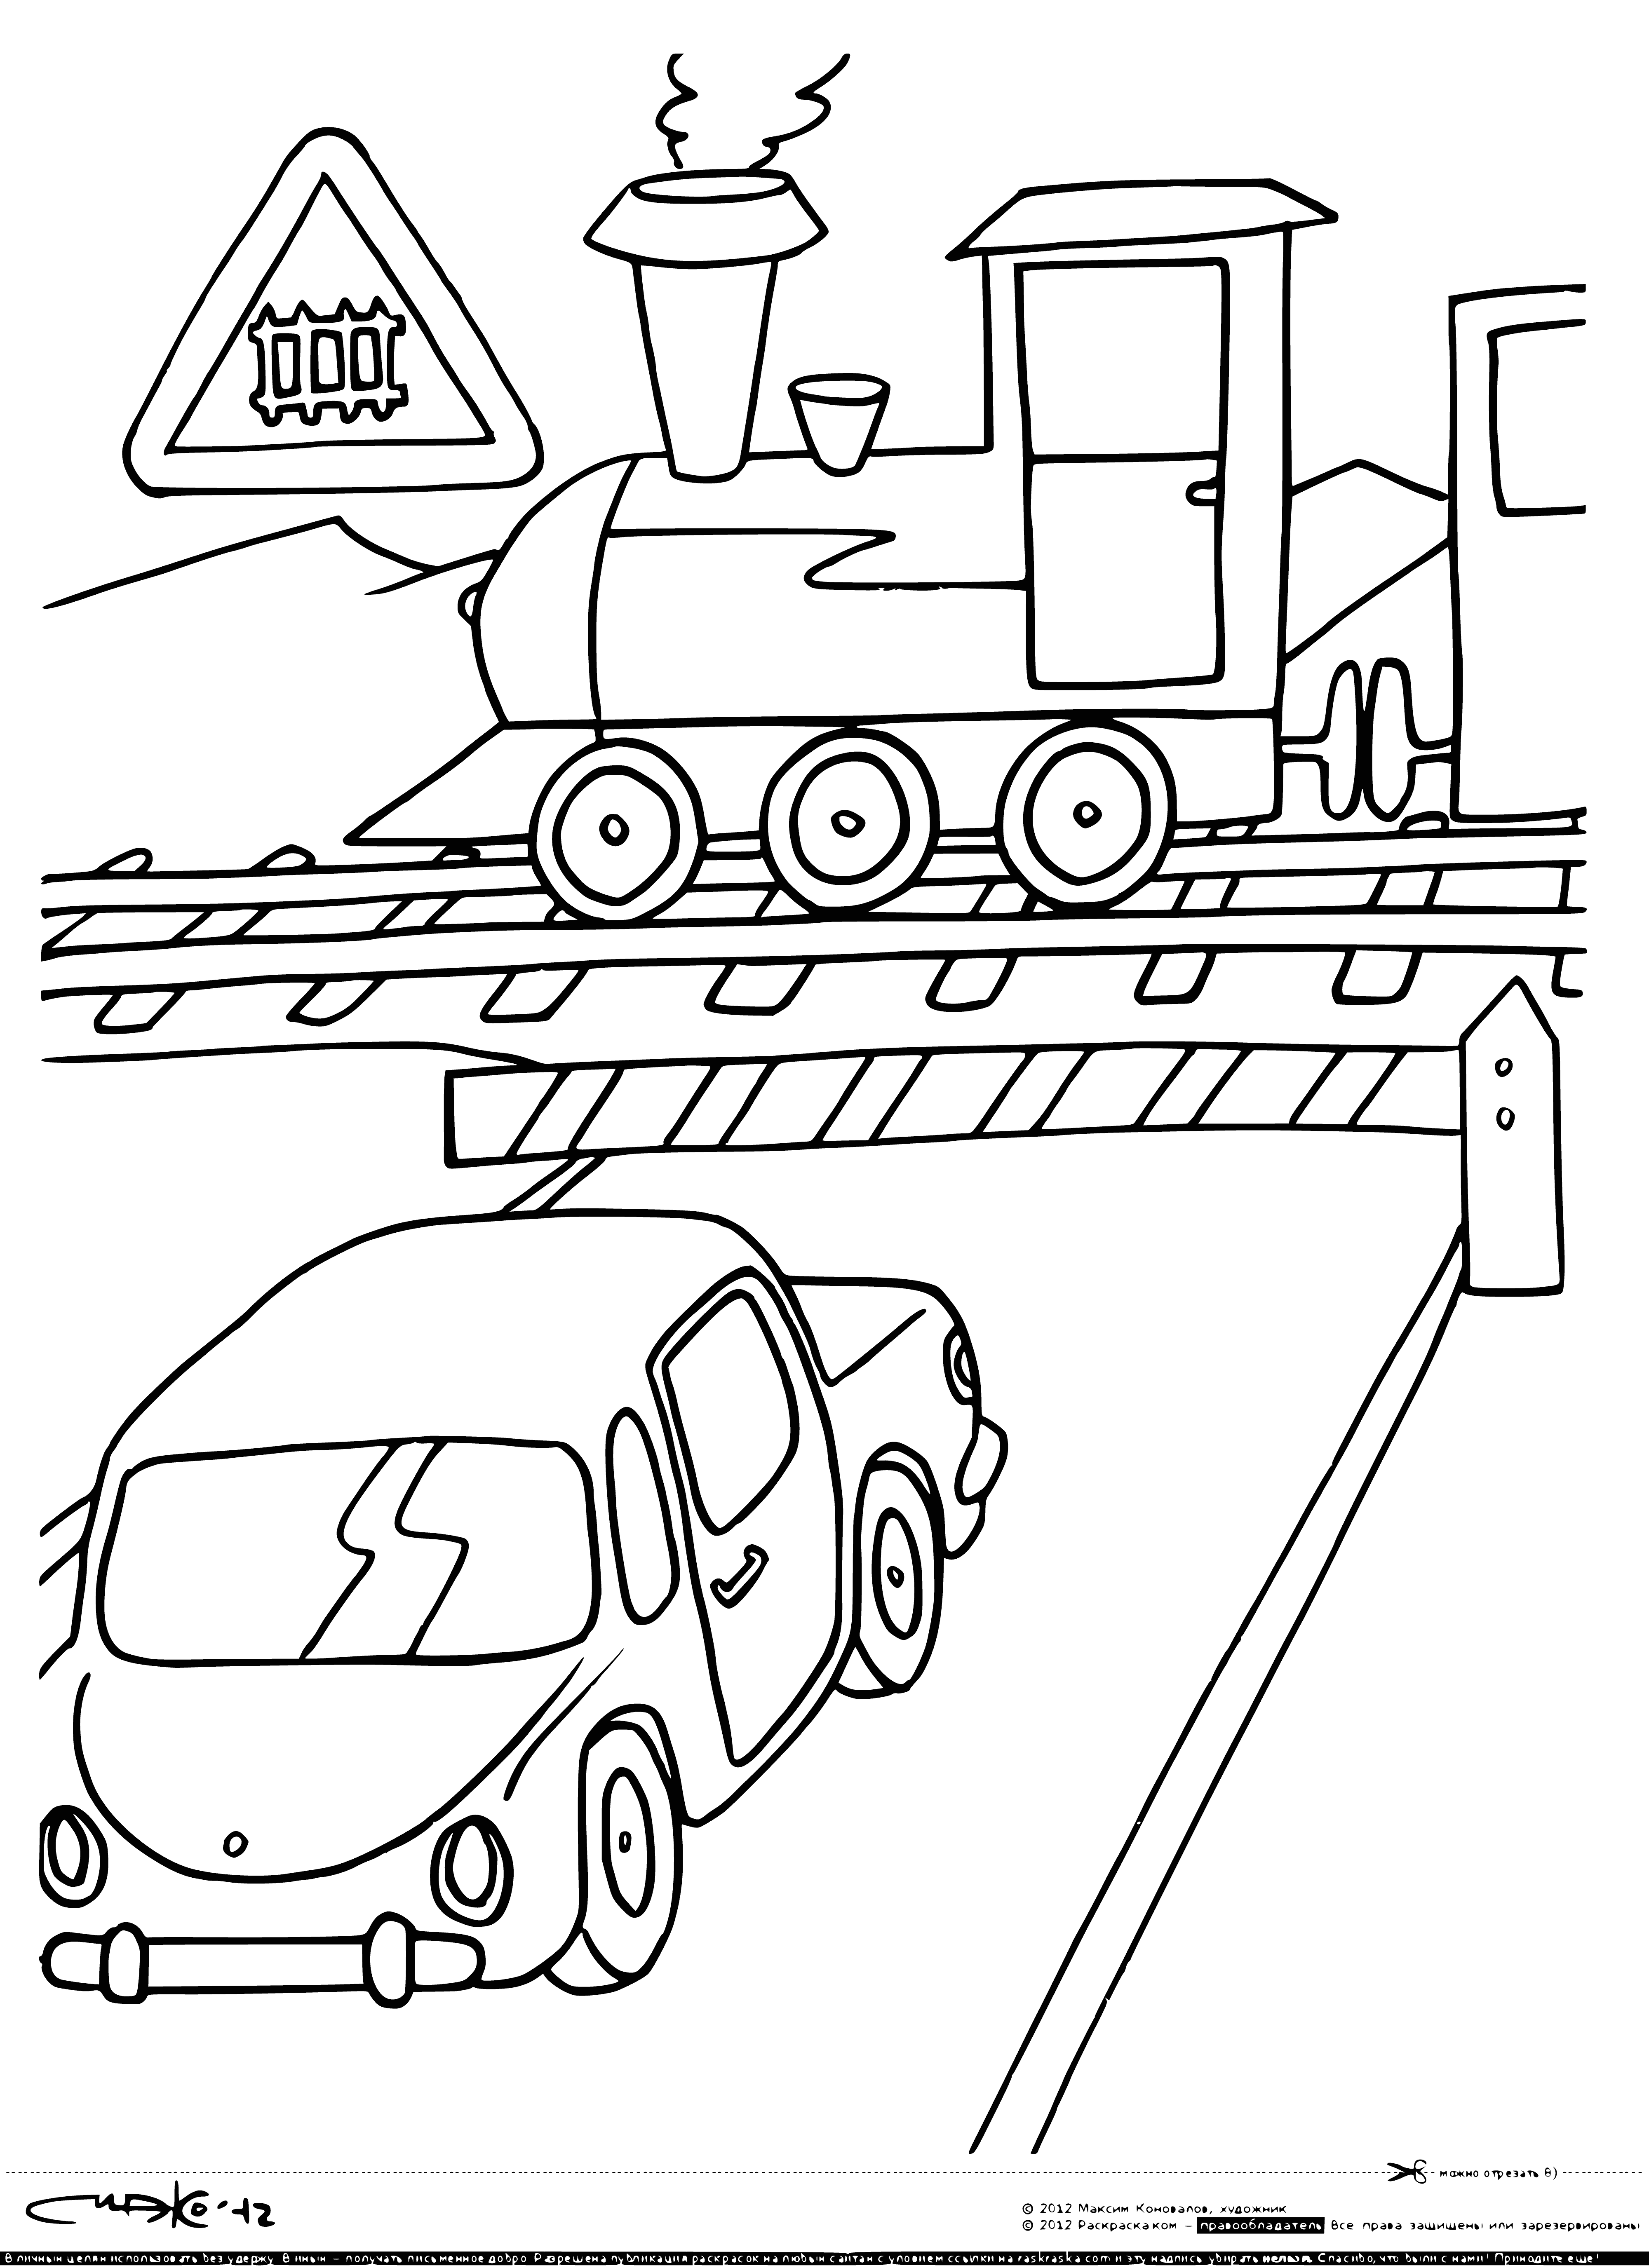 coloring page: Stop sign & barrier at railway crossings indicate danger; red sign with white hand means stop & wait for the barrier to be raised.